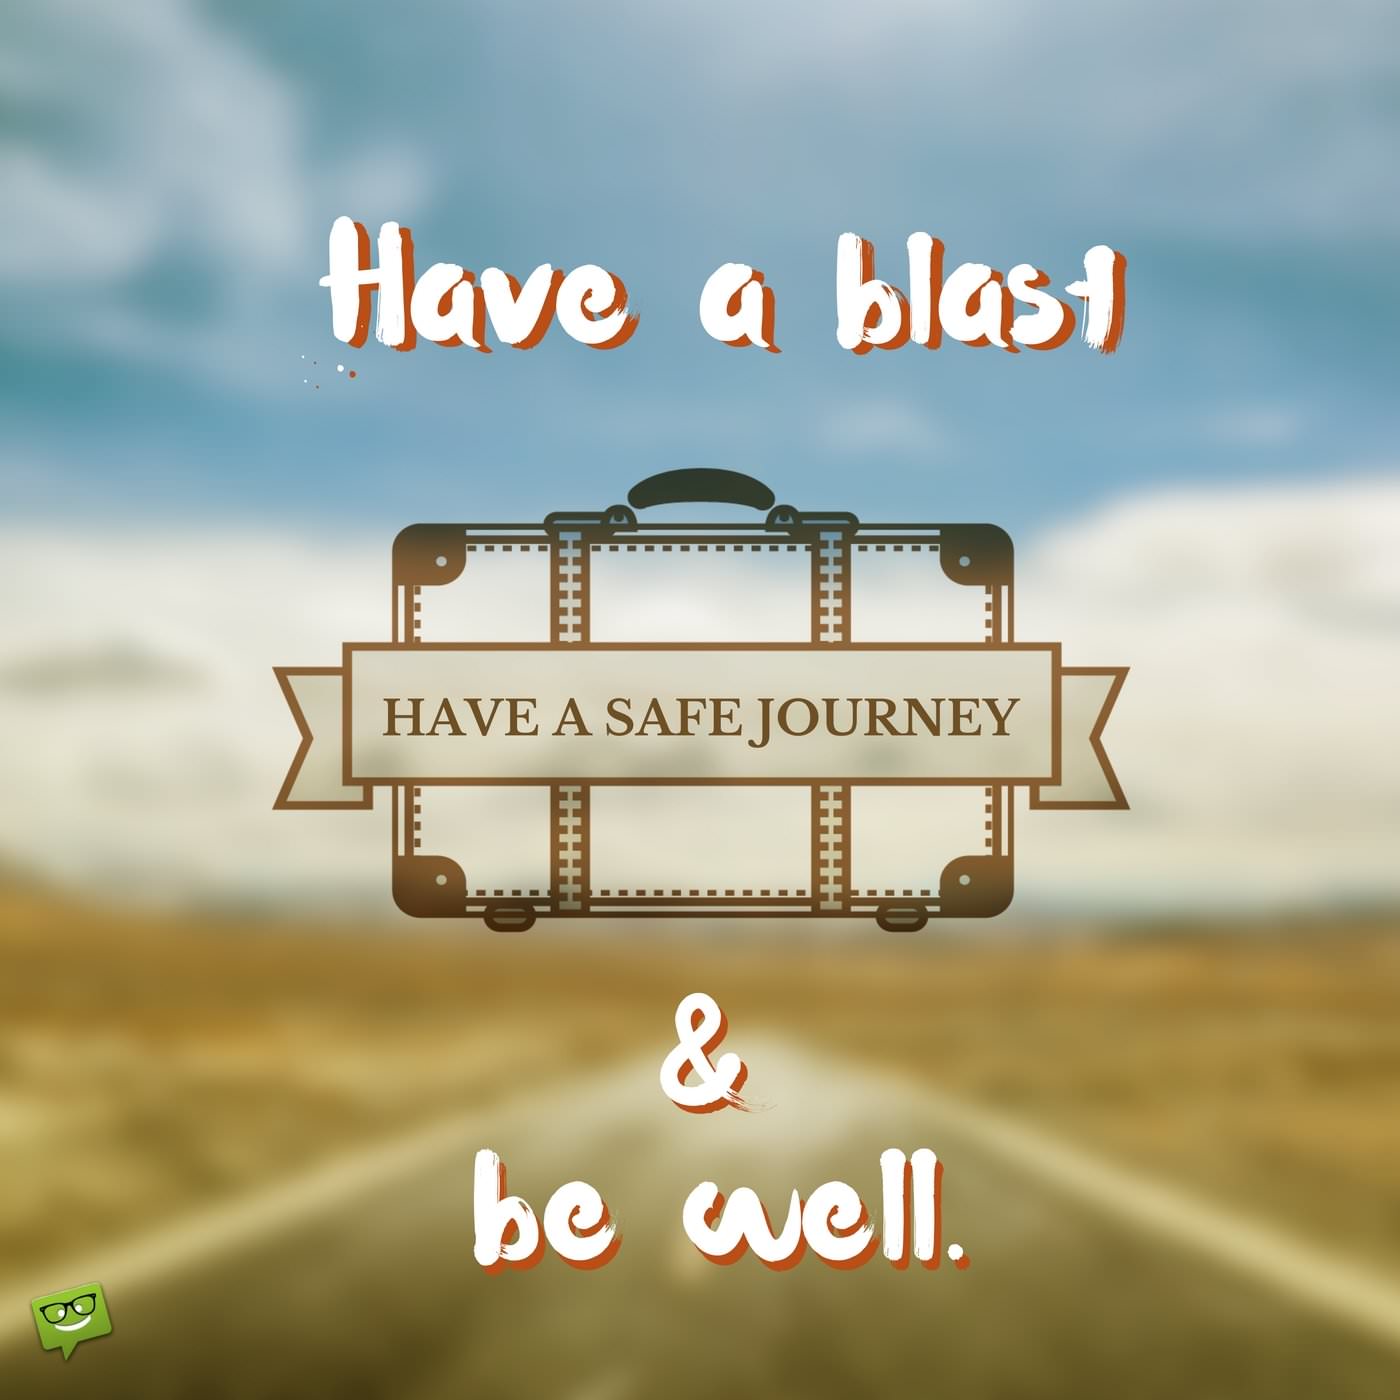 safe travel wishes images